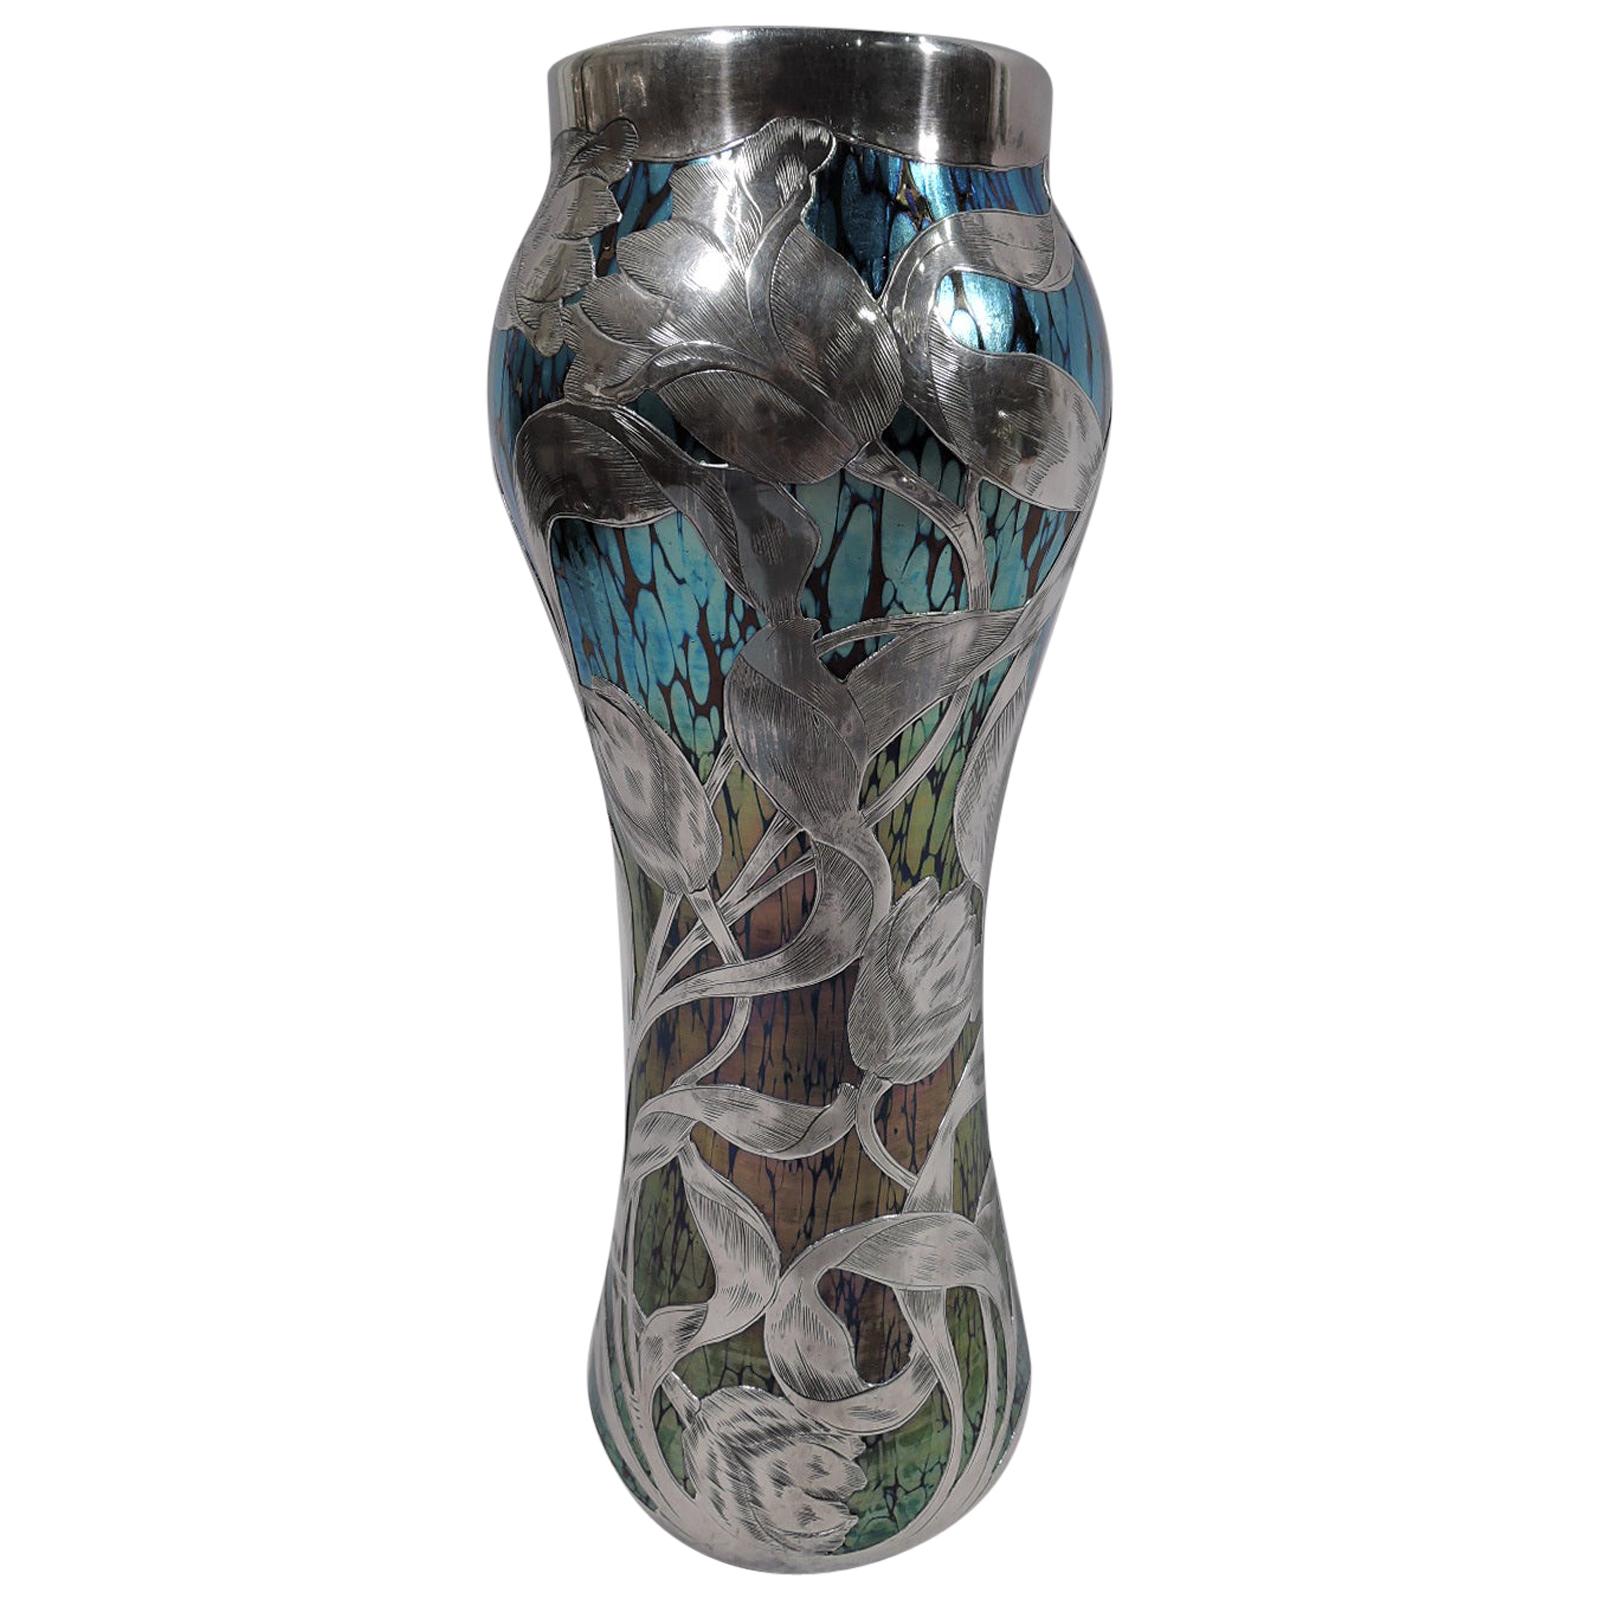 Loetz Iridescent Glass & Silver Overlay Vase with Dramatic Blooms